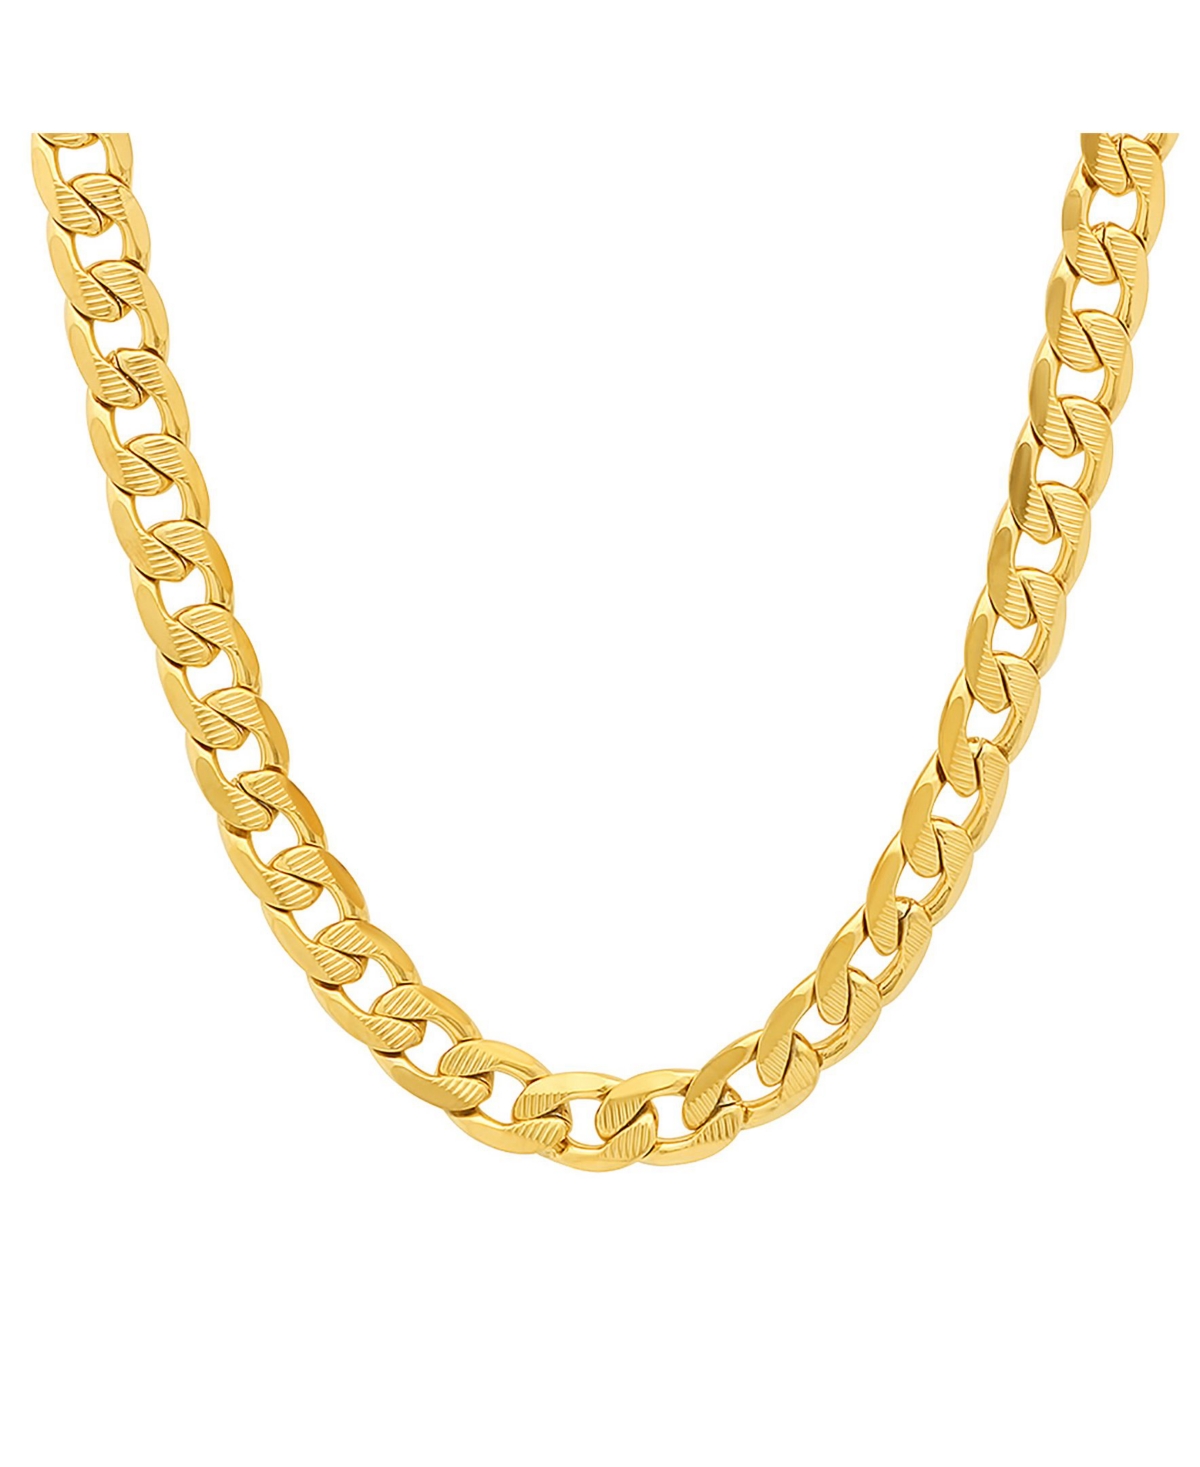 Men's 18k gold Plated Stainless Steel Accented 10mm Figaro Chain 24" Necklaces - Gold